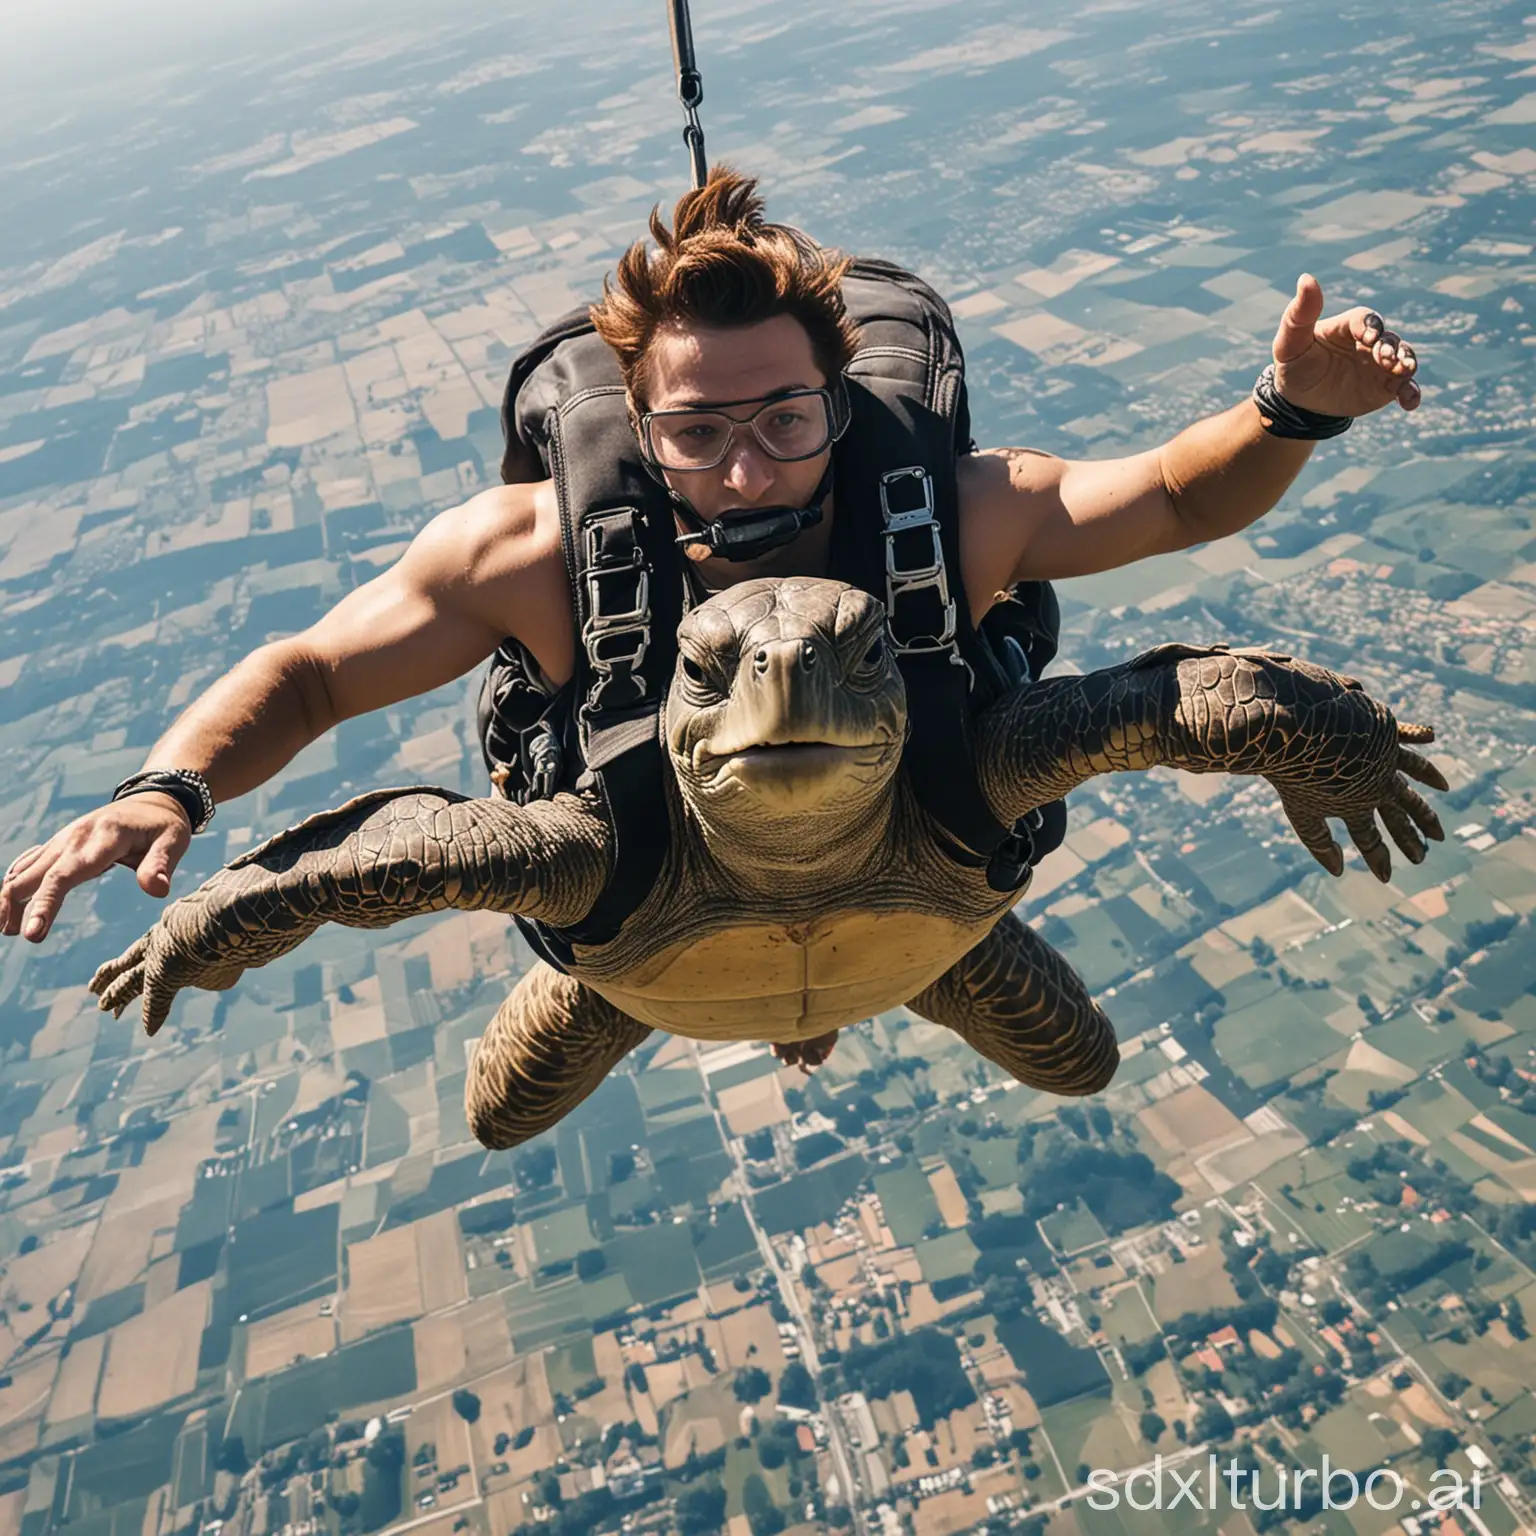 Thrilling-Skydiving-Adventure-with-Human-and-Turtle